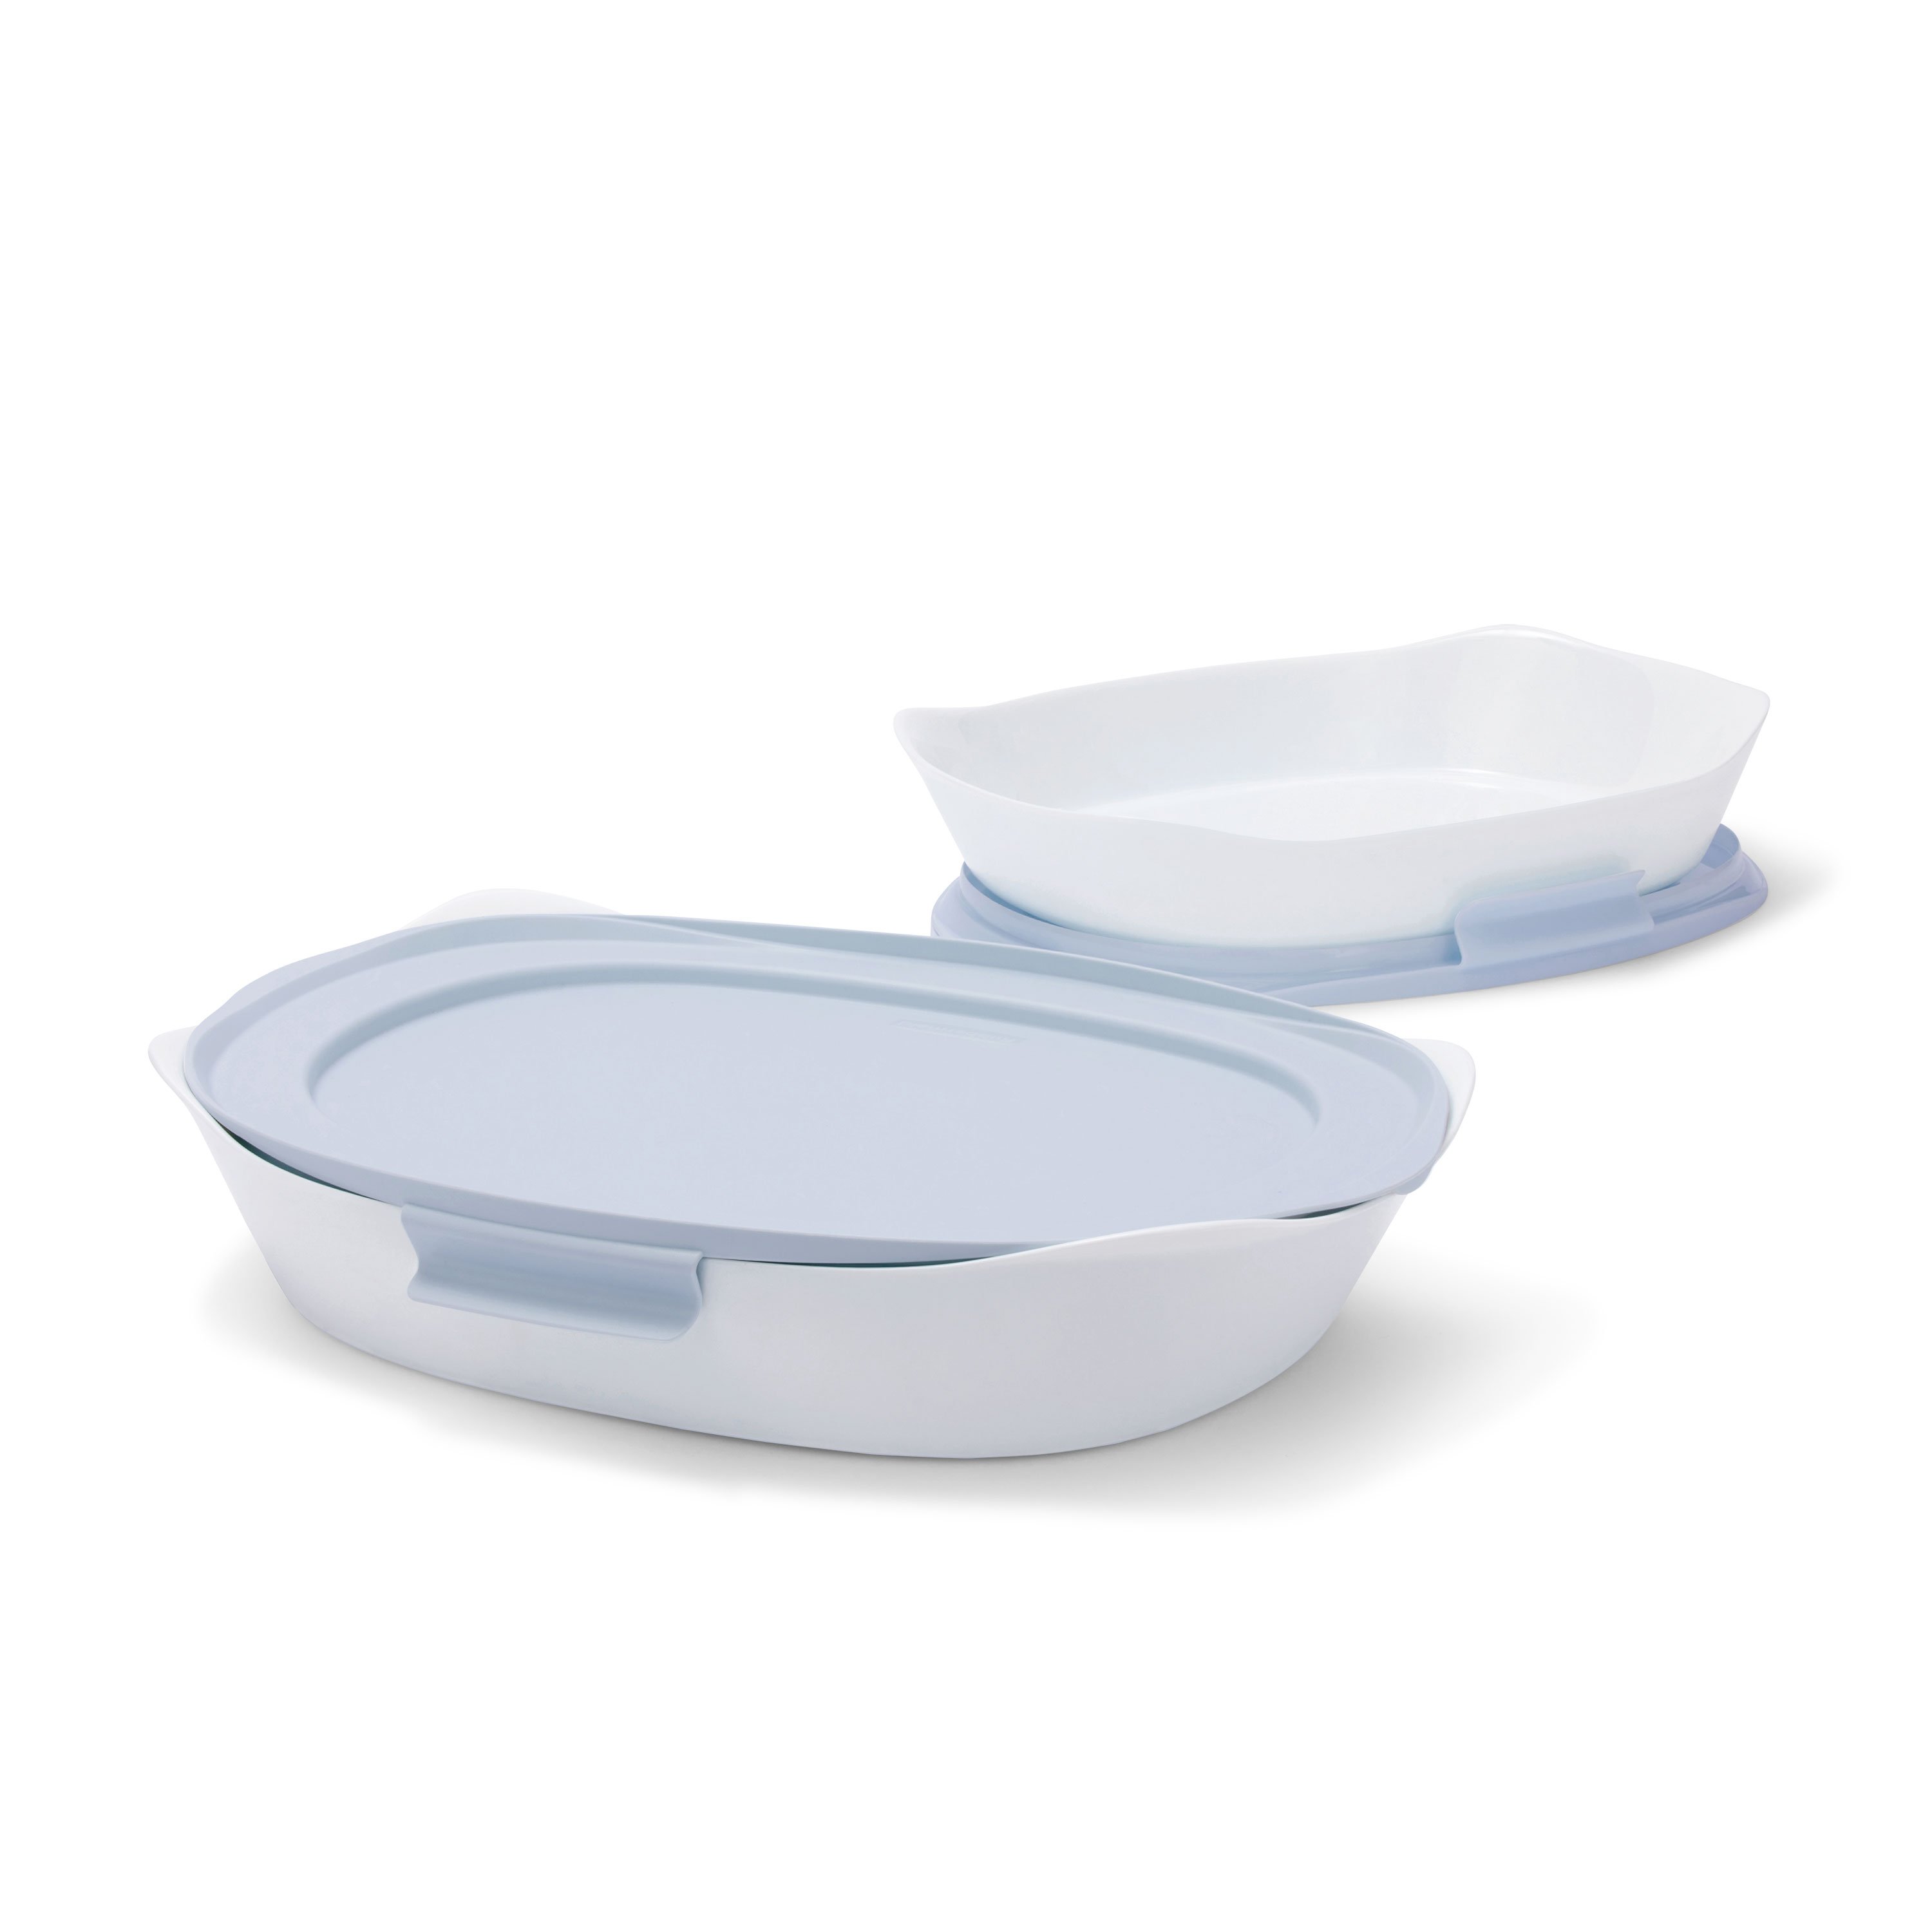 Rubbermaid® DuraLite™ Glass Bakeware, 4-Piece Set with Lids, Baking Dishes  or Casserole Dishes, 9 x 13 and 8 x 12